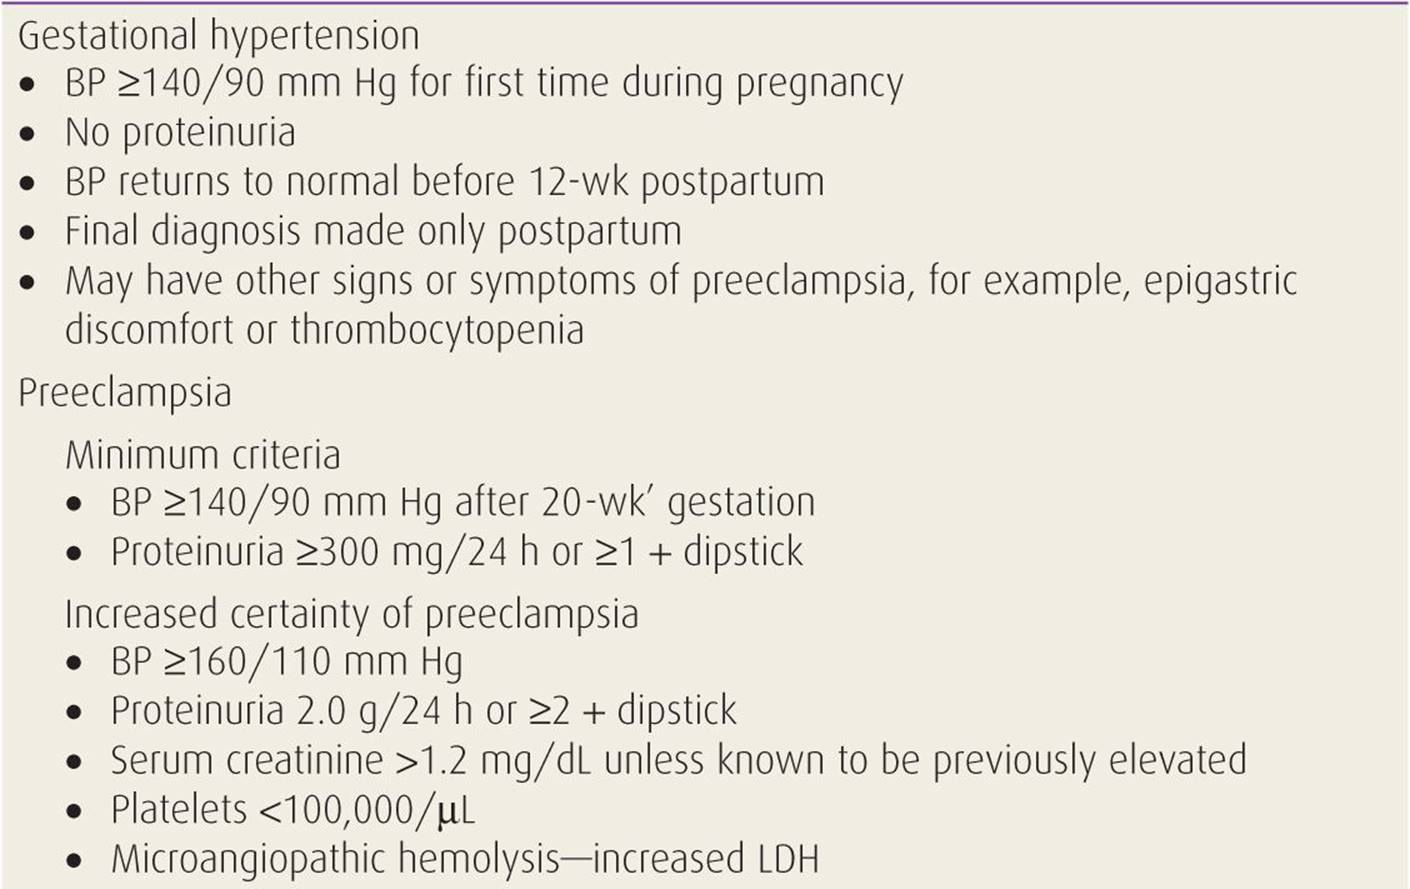 gestational hypertension and preeclampsia